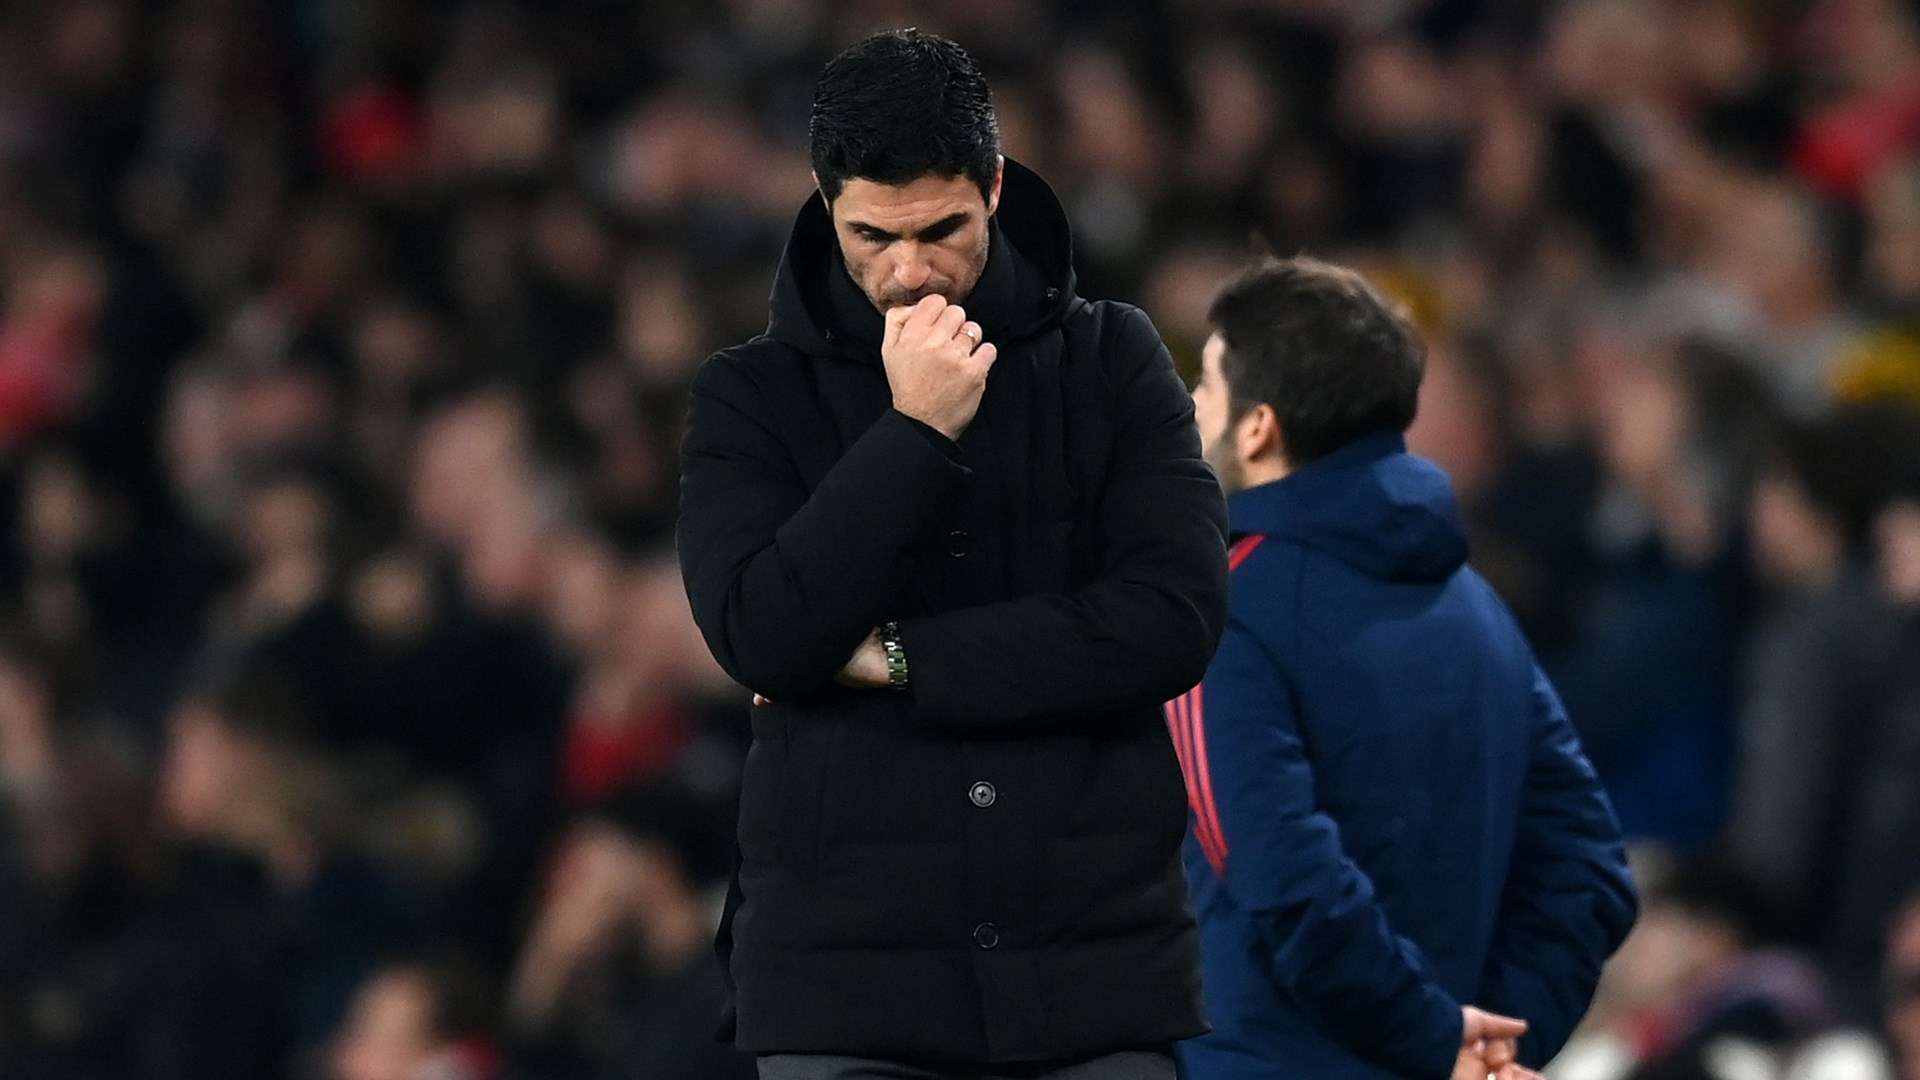 Mikel Arteta Arsenal manager ponders during defeat to Manchester City in 2022-23 Premier League